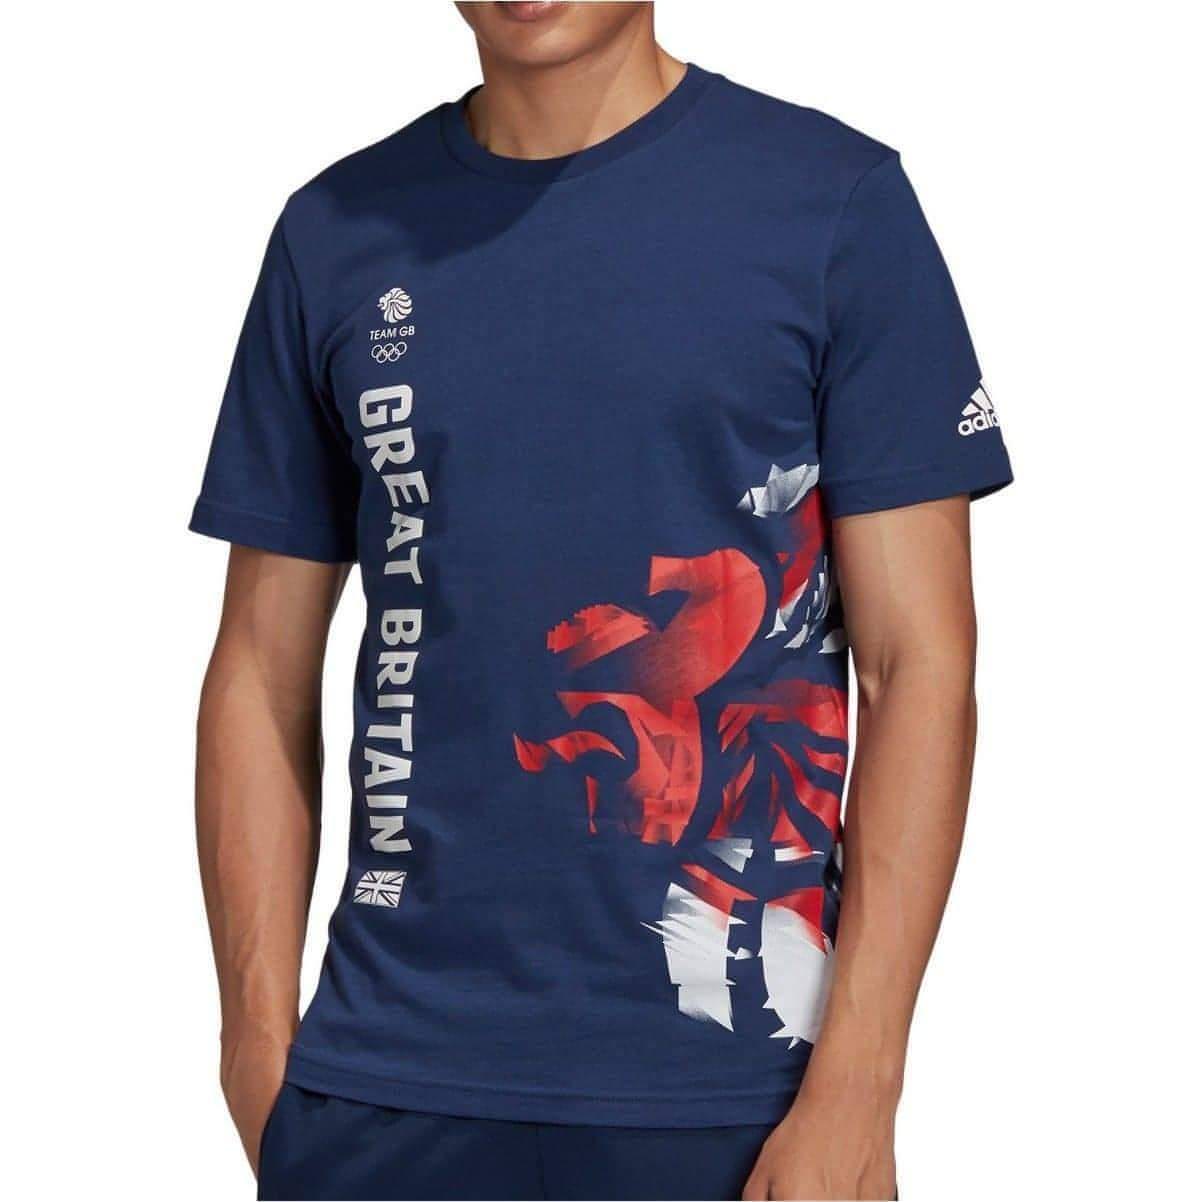 adidas Team GB Graphic Short Sleeve Mens Supporters Top - Navy - Start Fitness